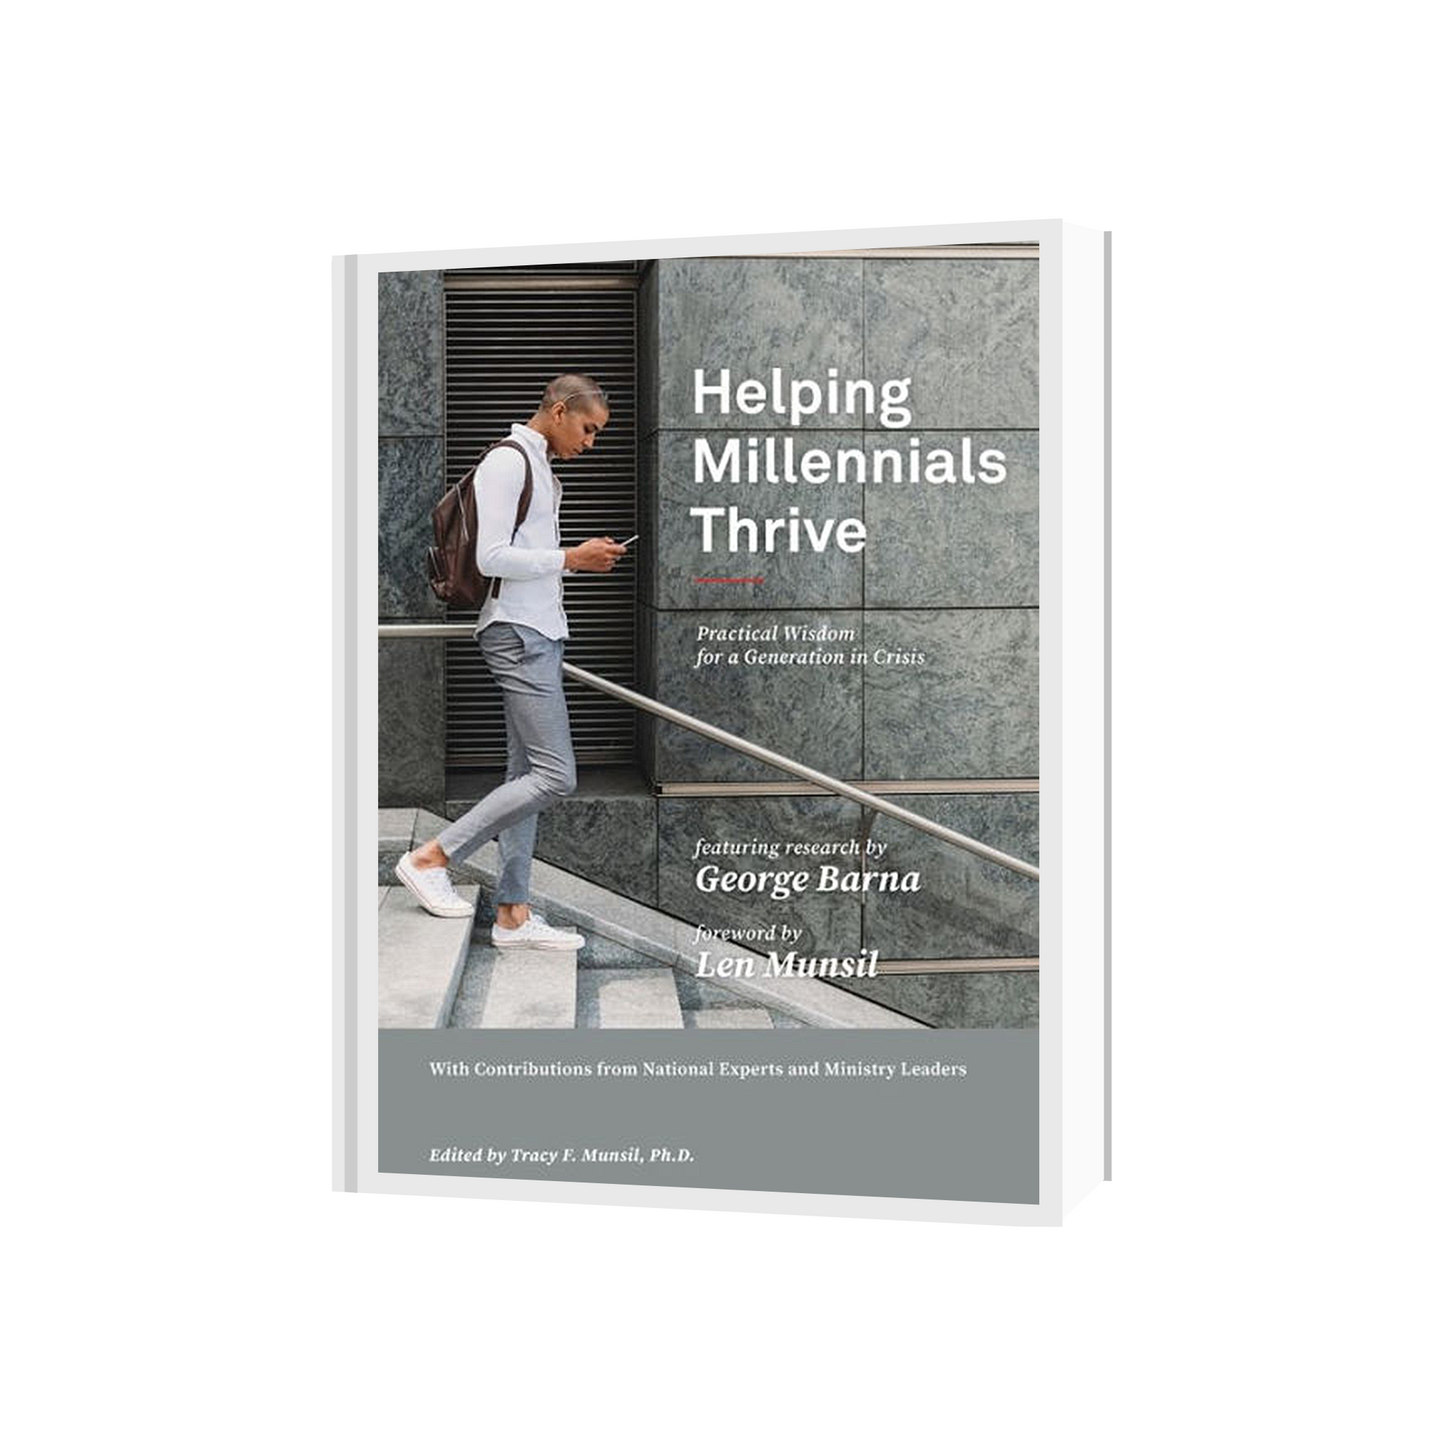 Helping Millennials Thrive | Practical Wisdom for a Generation in Crisis